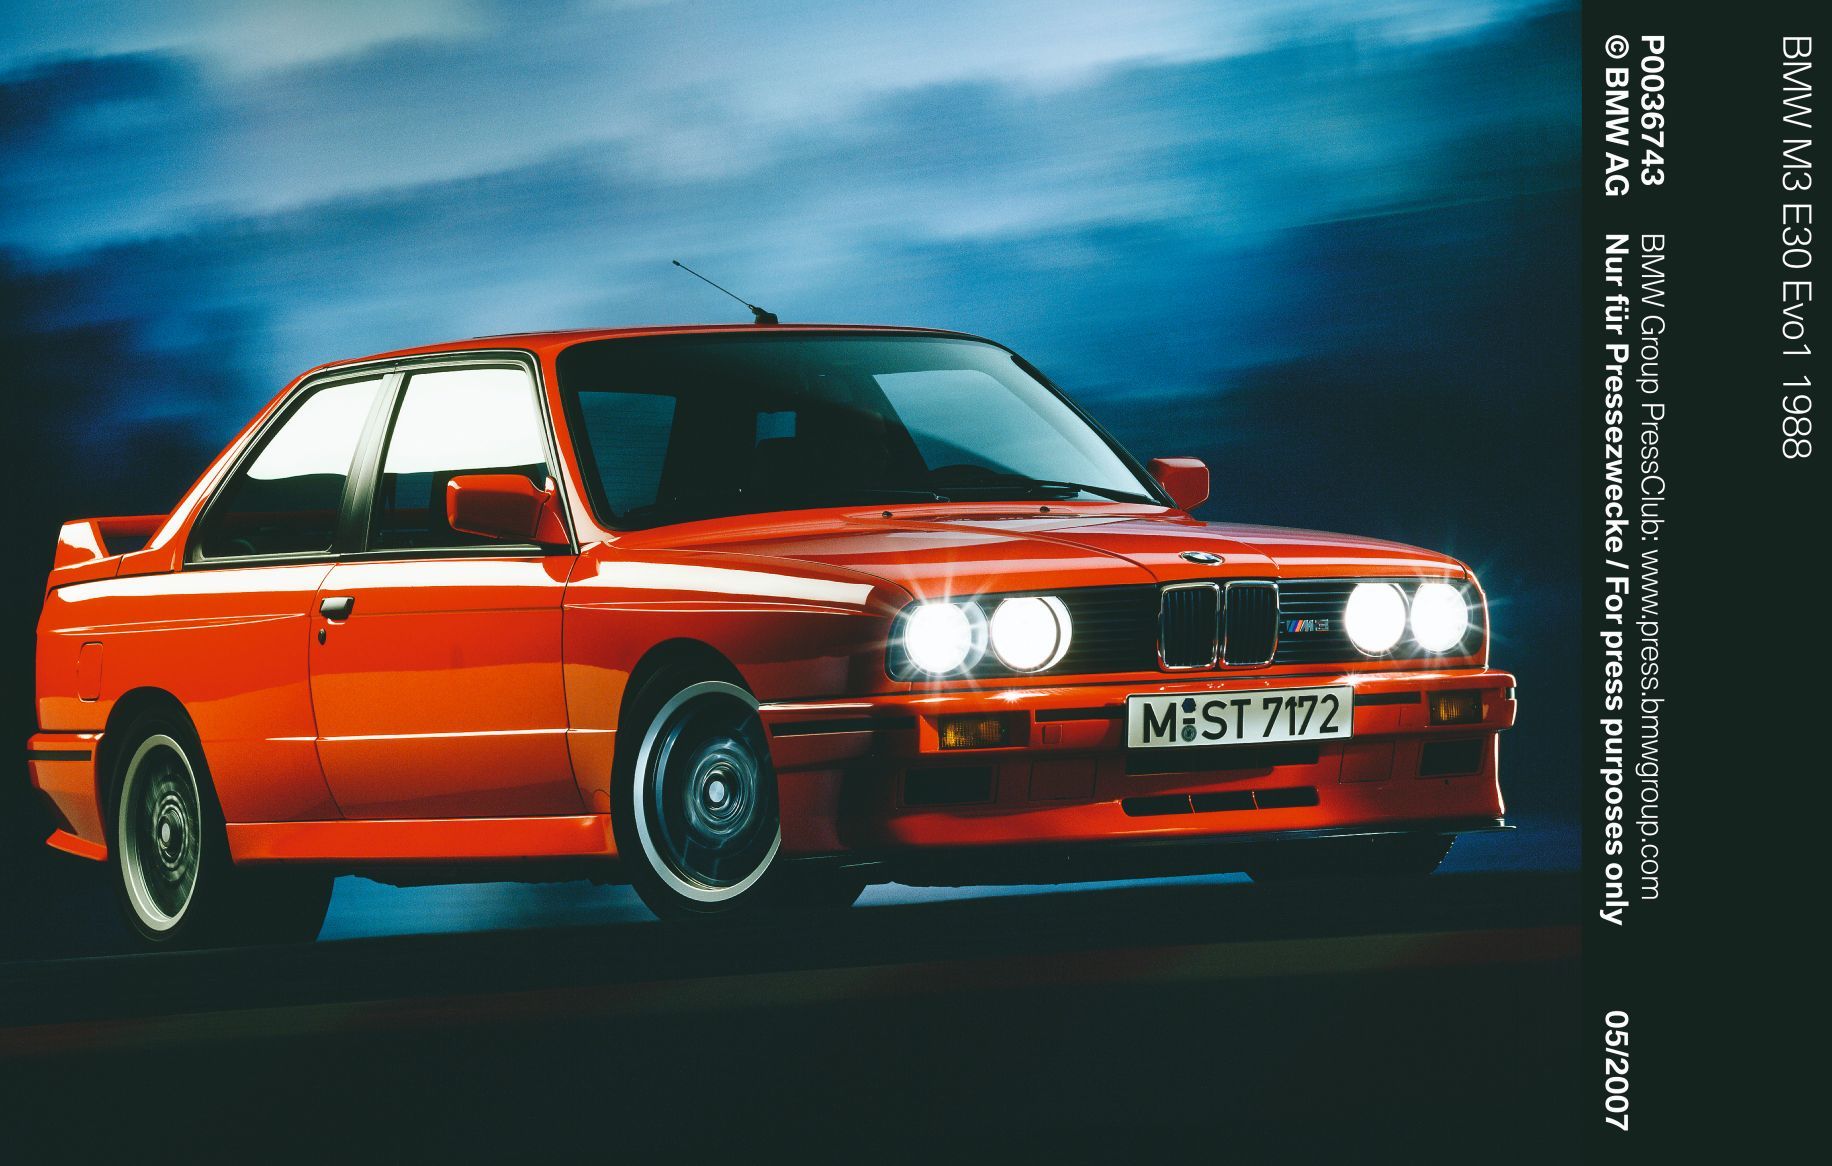 BMW M: The History of BMW M Cars